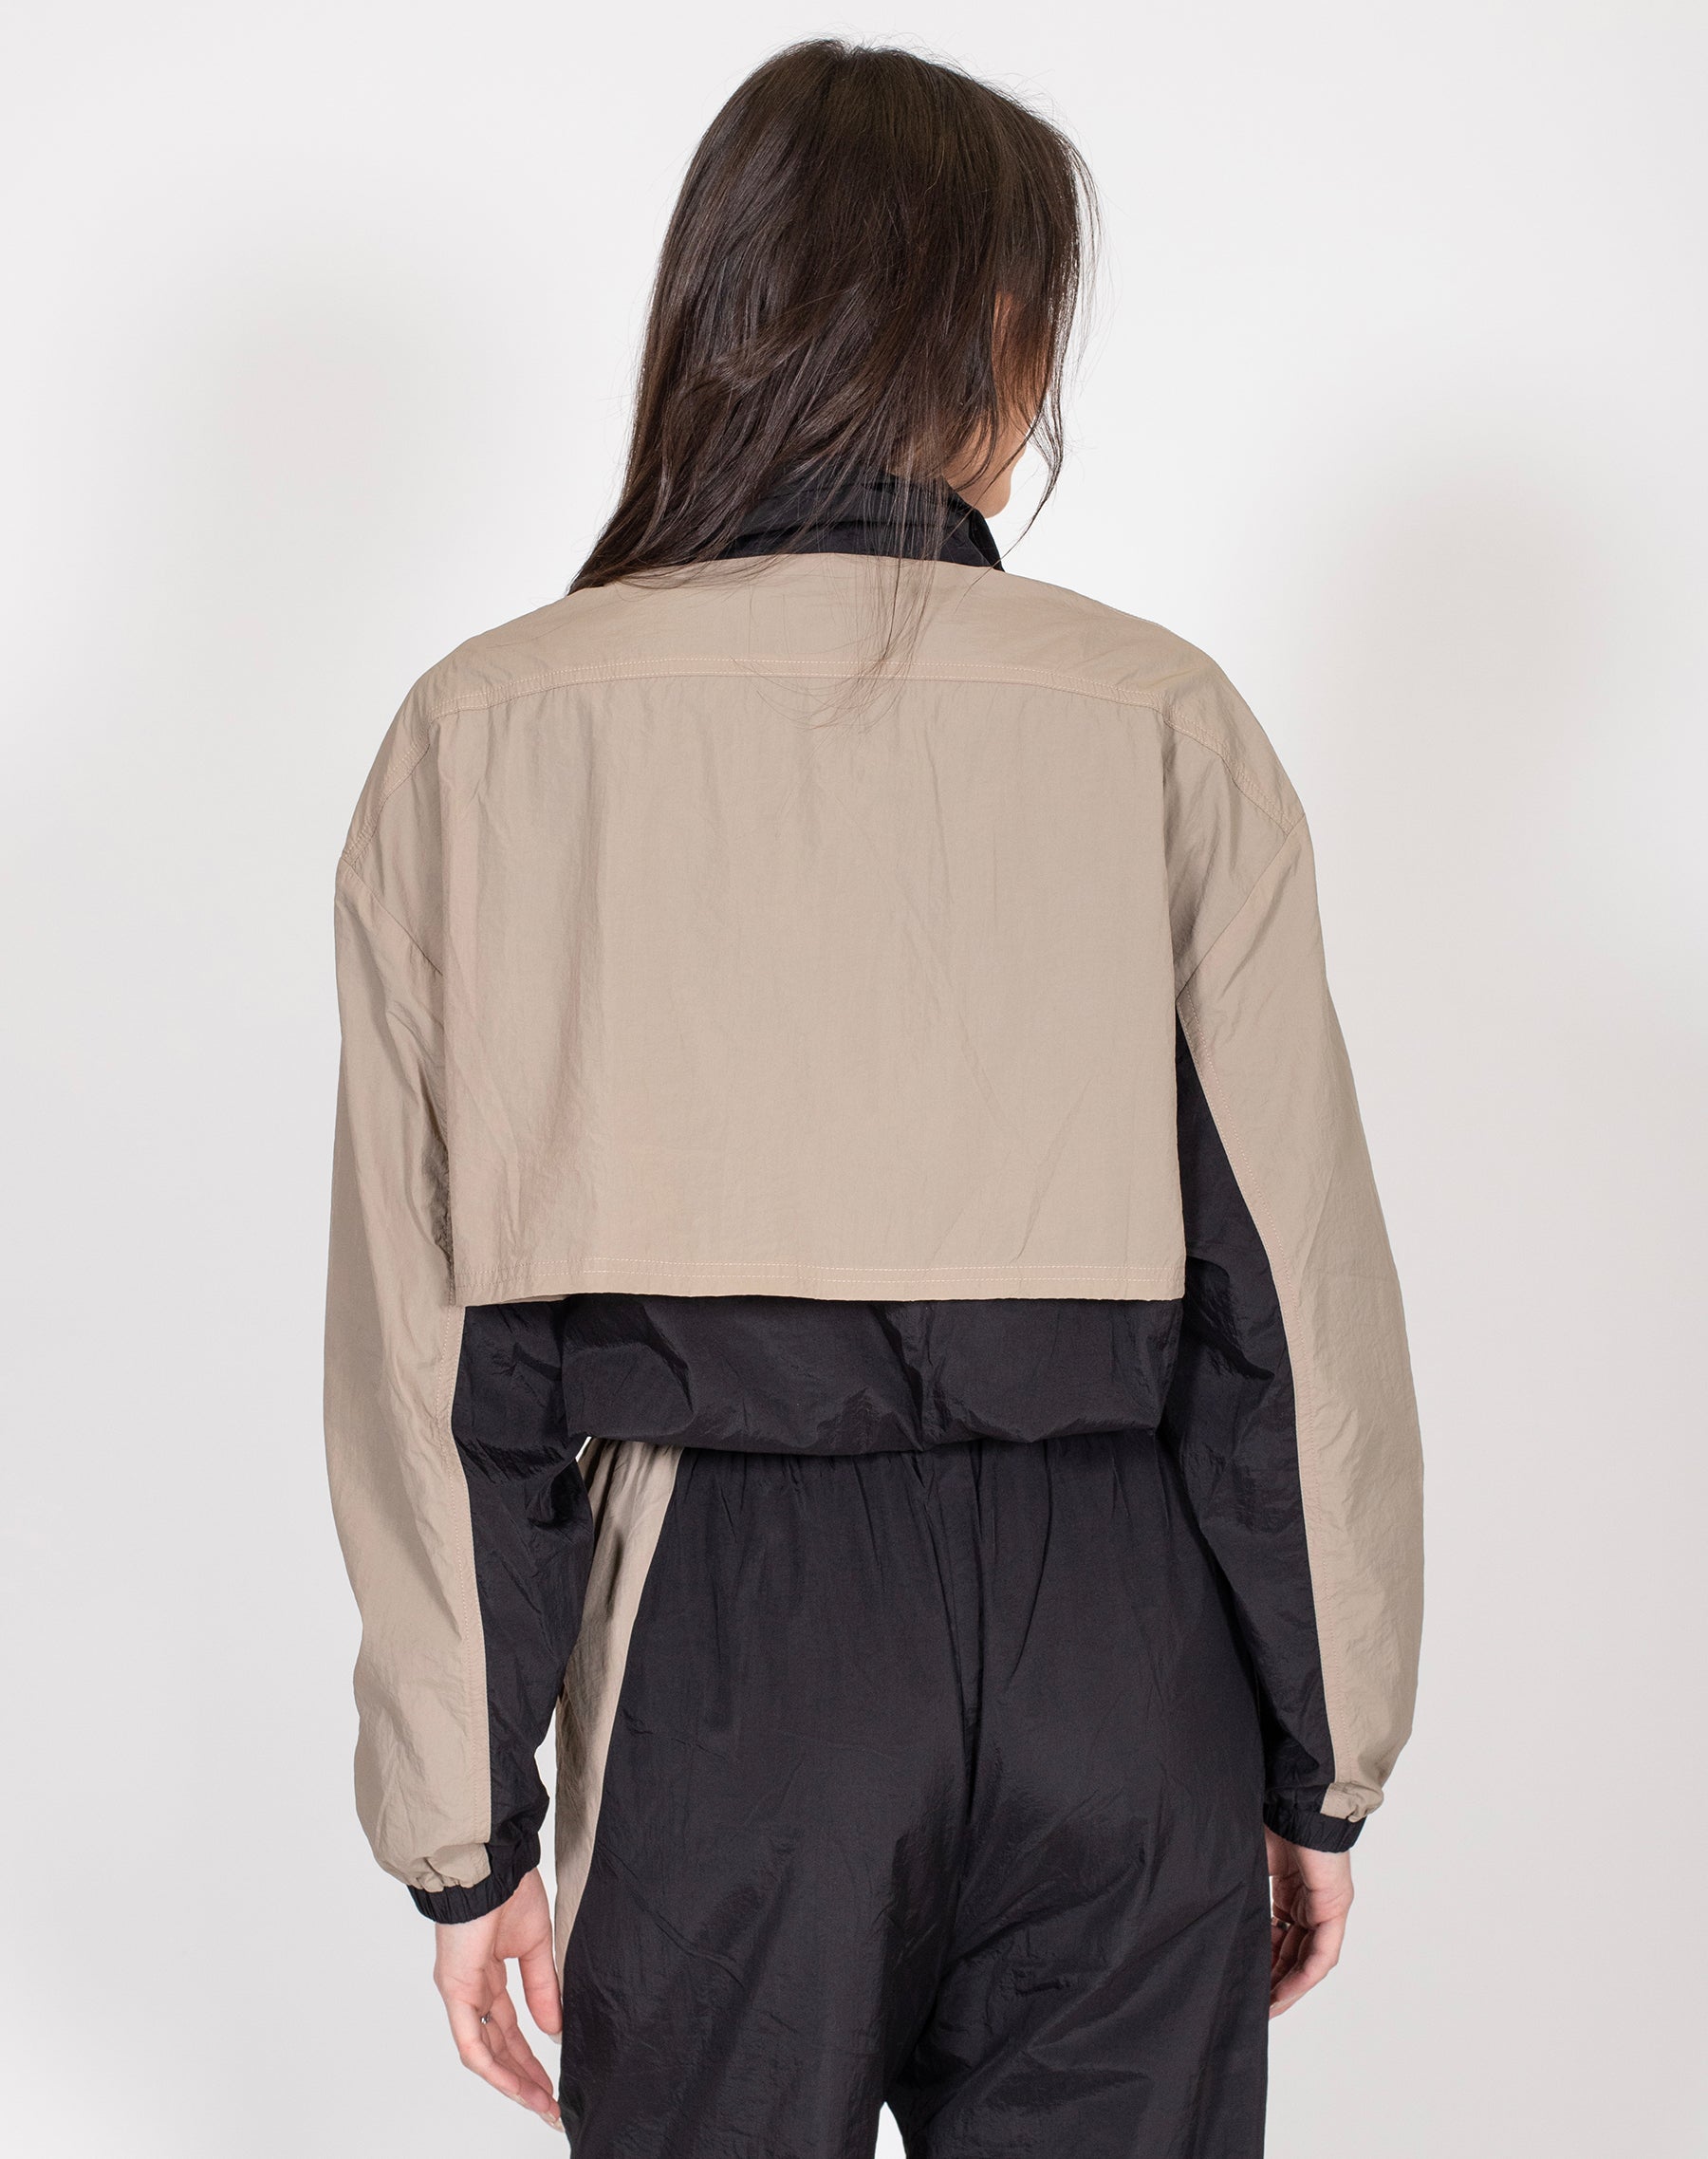 The "SERENA" Track Jacket | Oyster